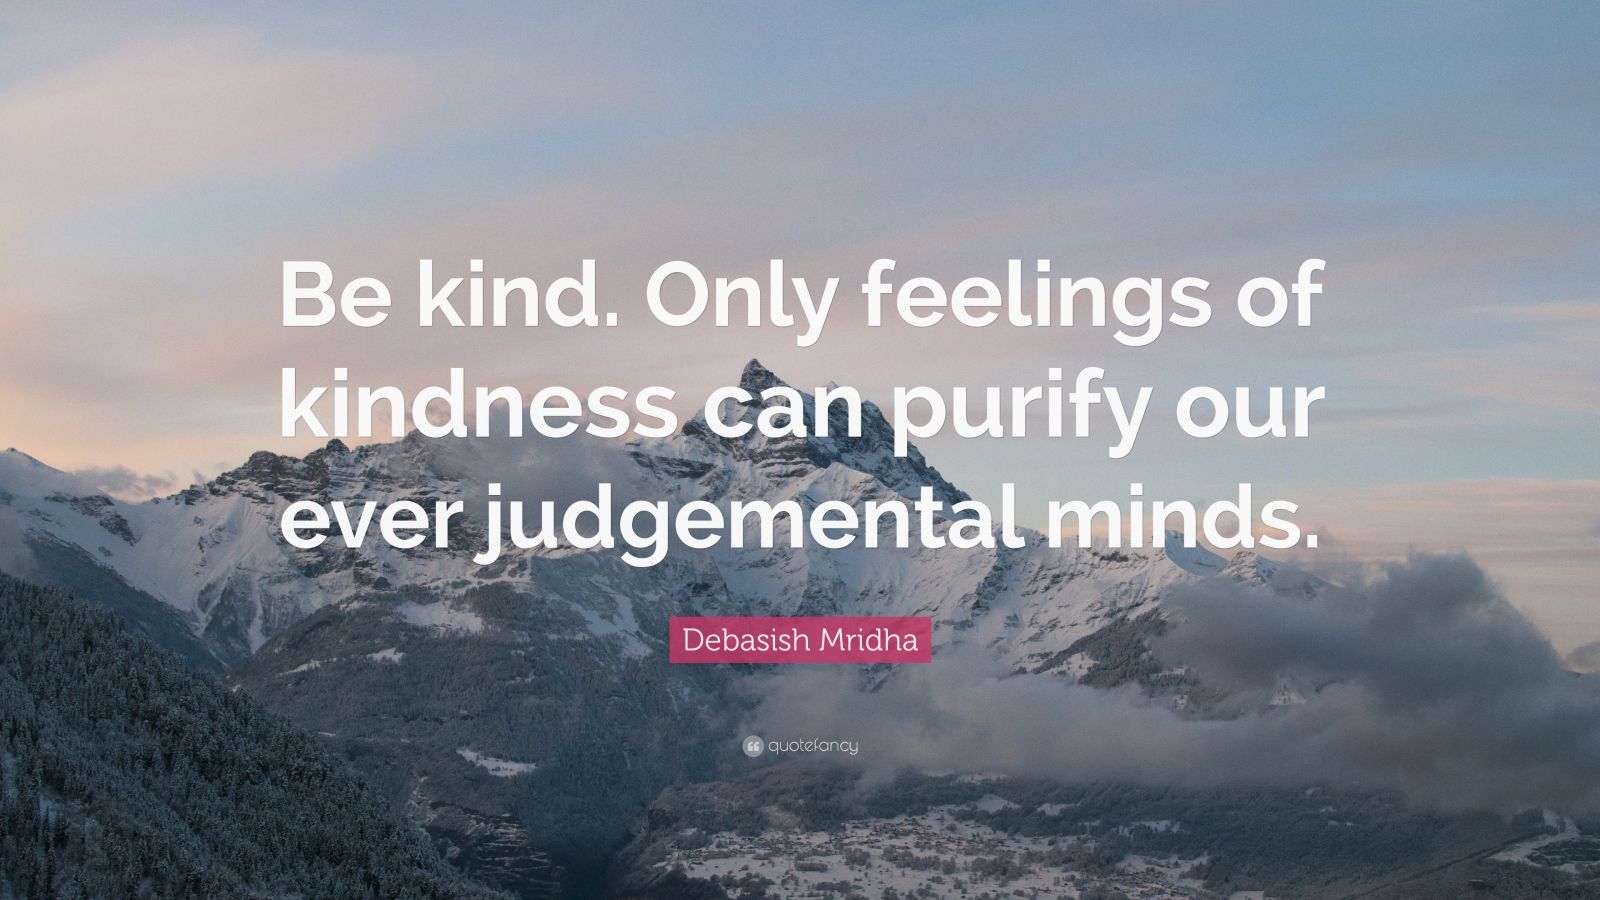 Debasish Mridha Quote: “Be kind. Only feelings of kindness can purify ...